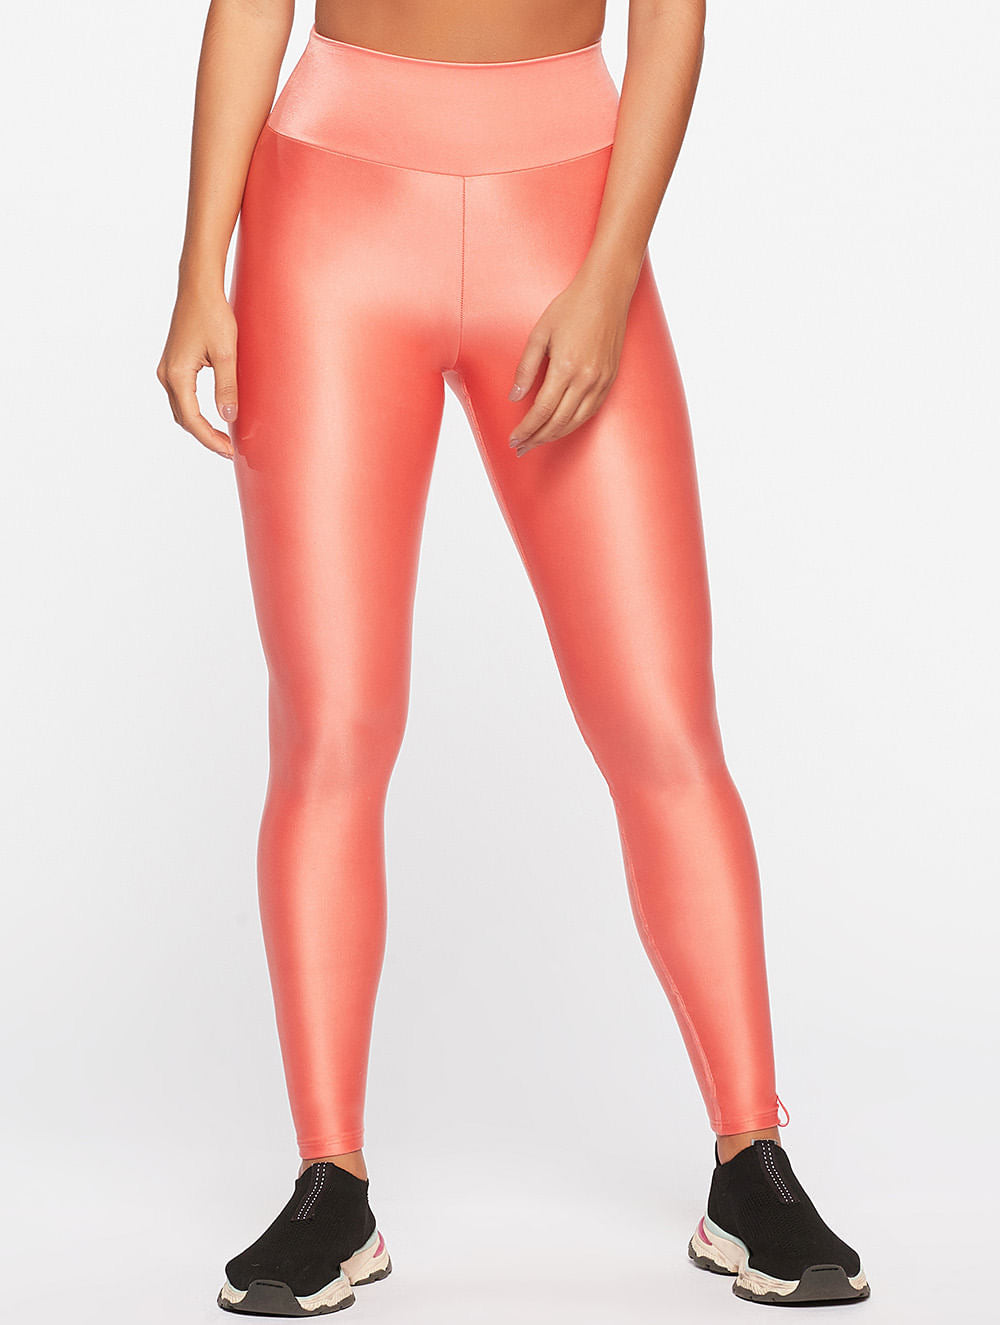 Leggings Basic Body For Sure – Mineral Fashion Store